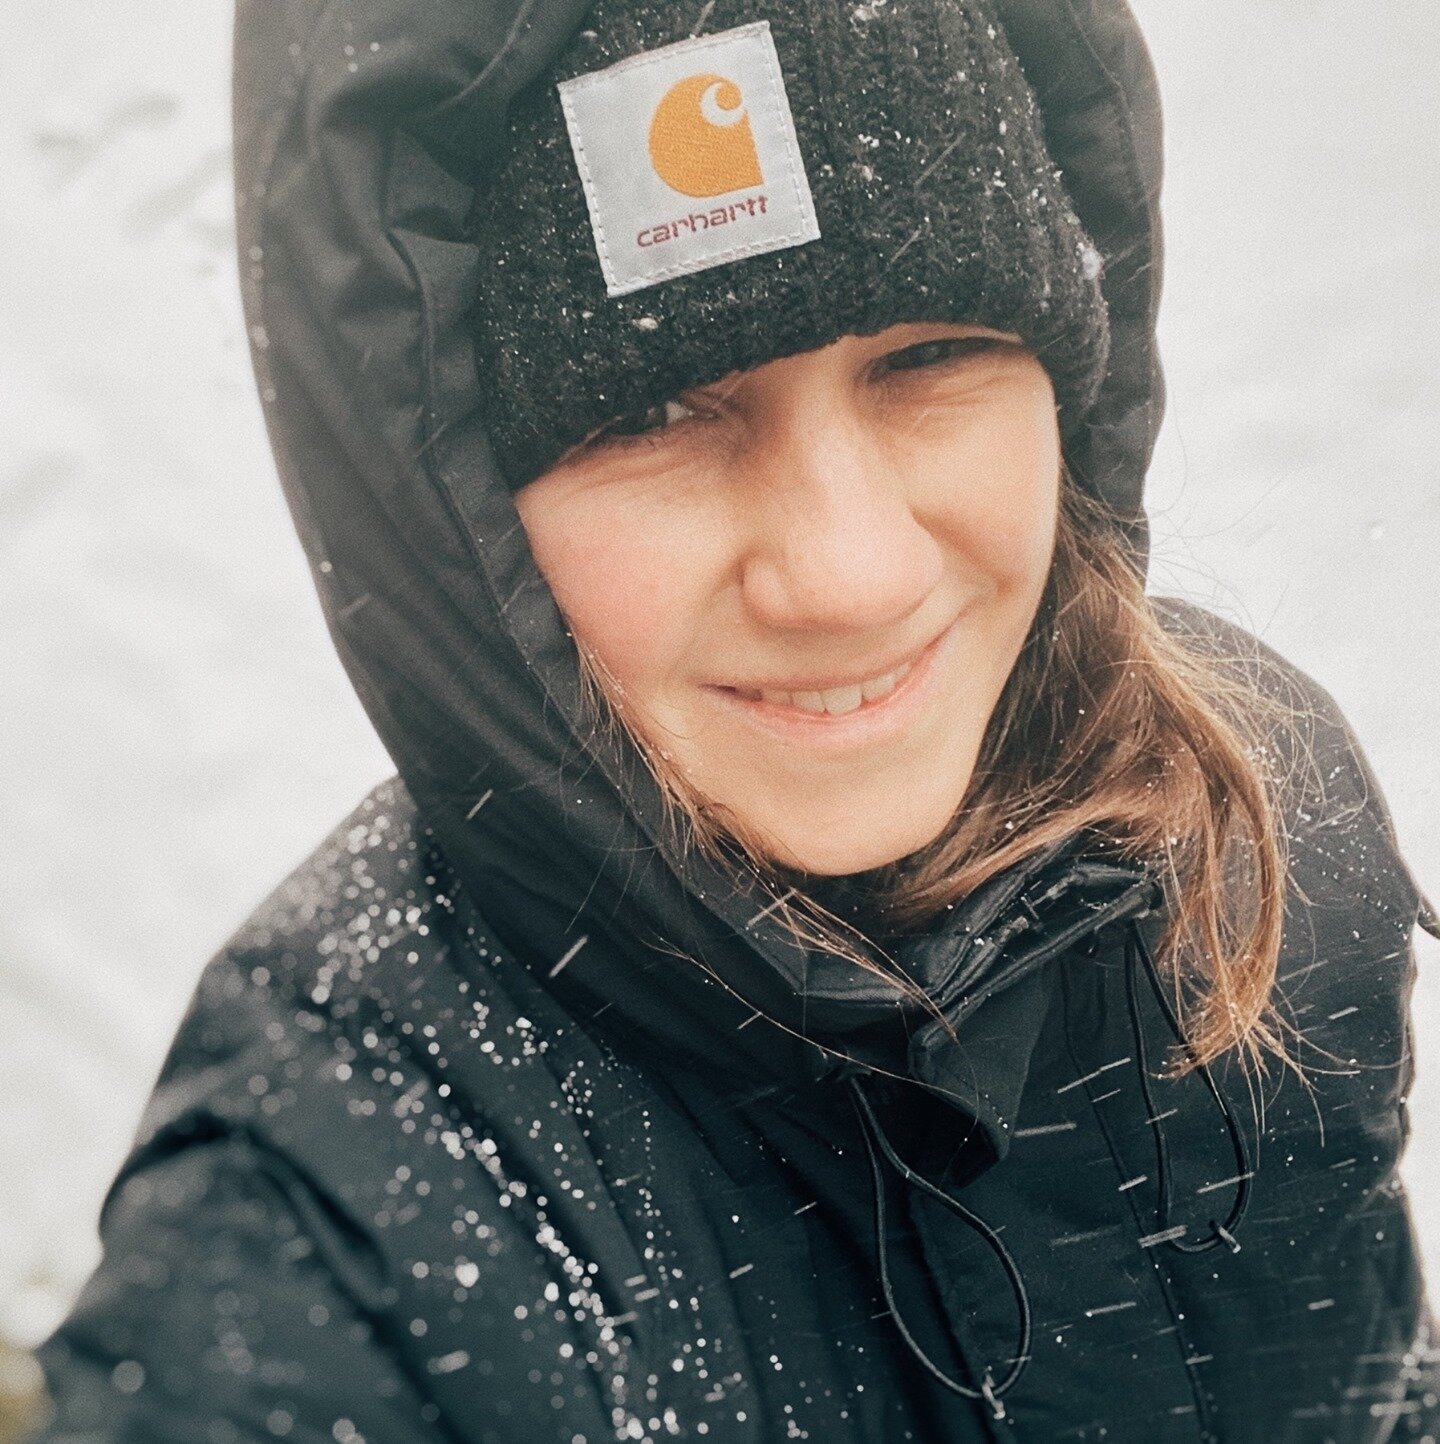 Contrary to what my timeline full of sweet summertime throwback pictures may suggest: yes, it has been snowing in The Netherlands and I was out here in the cold.⁠
⁠
⁠
⁠
#latergram #winter #letitsnow #snowselfie #winterwonderland #snowday #greatoutdoo